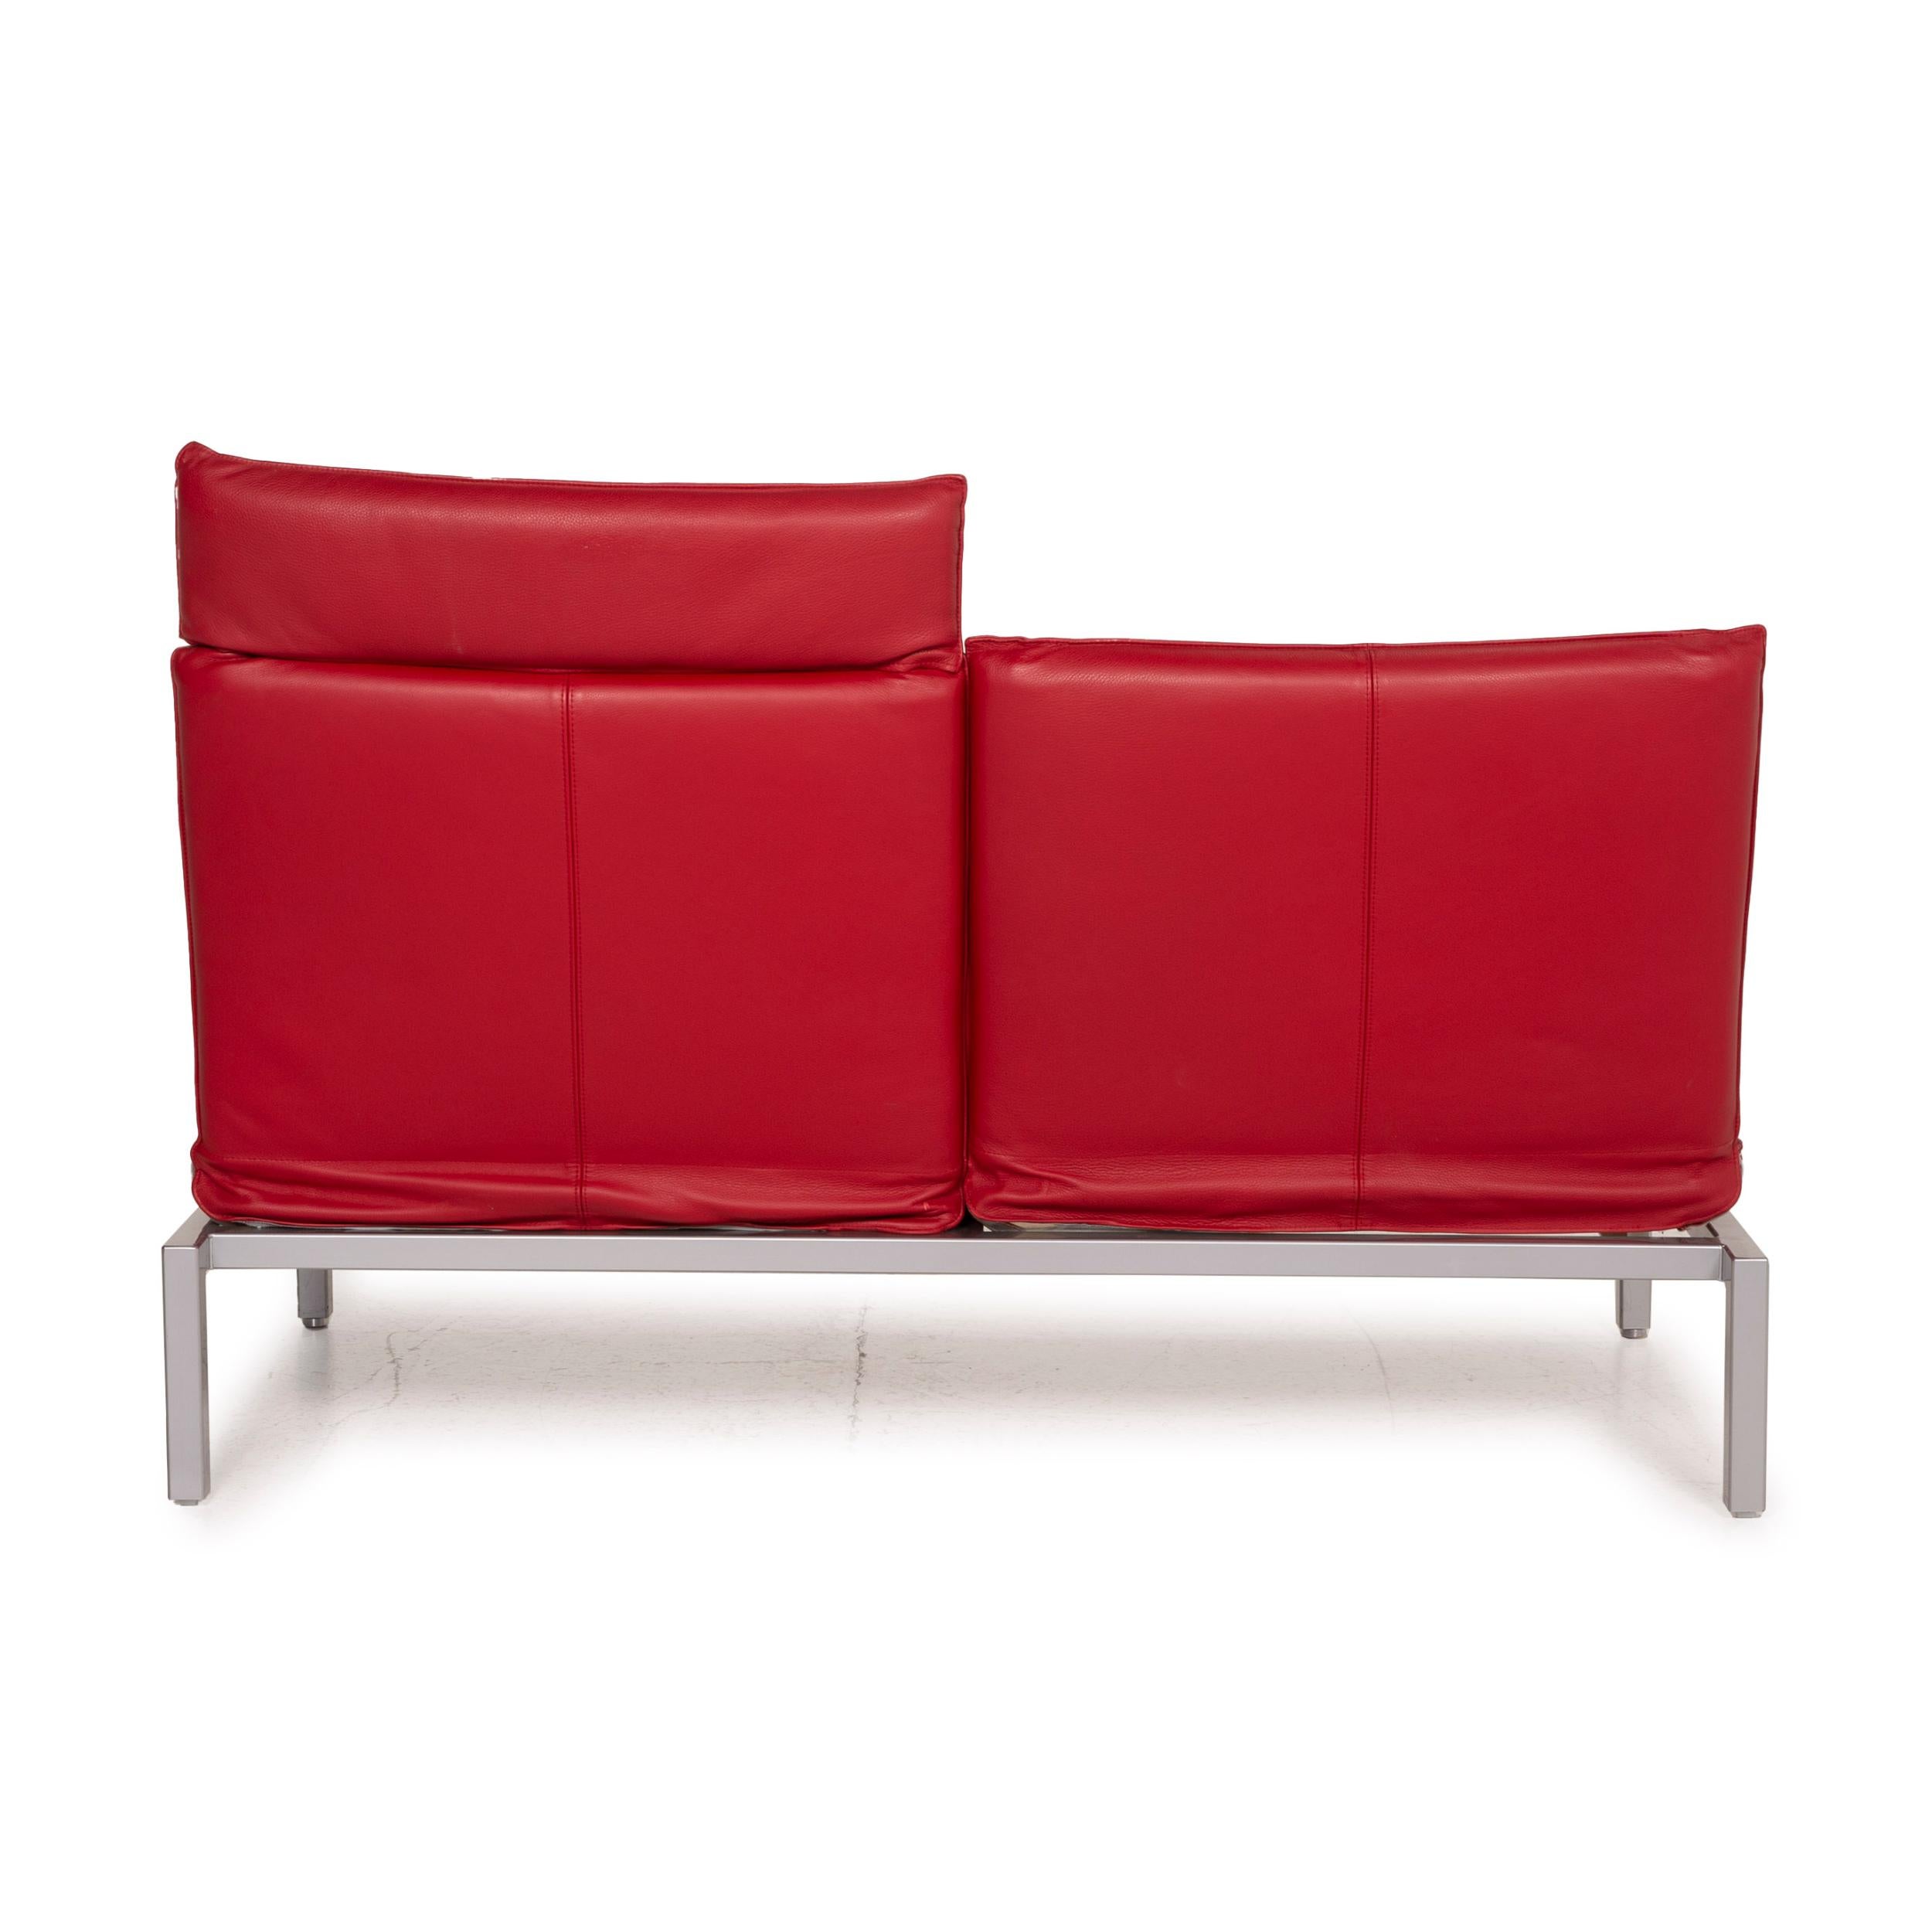 Brühl & Sippold Roro Leather Sofa Two-Seater Reclining Function Relaxation 6